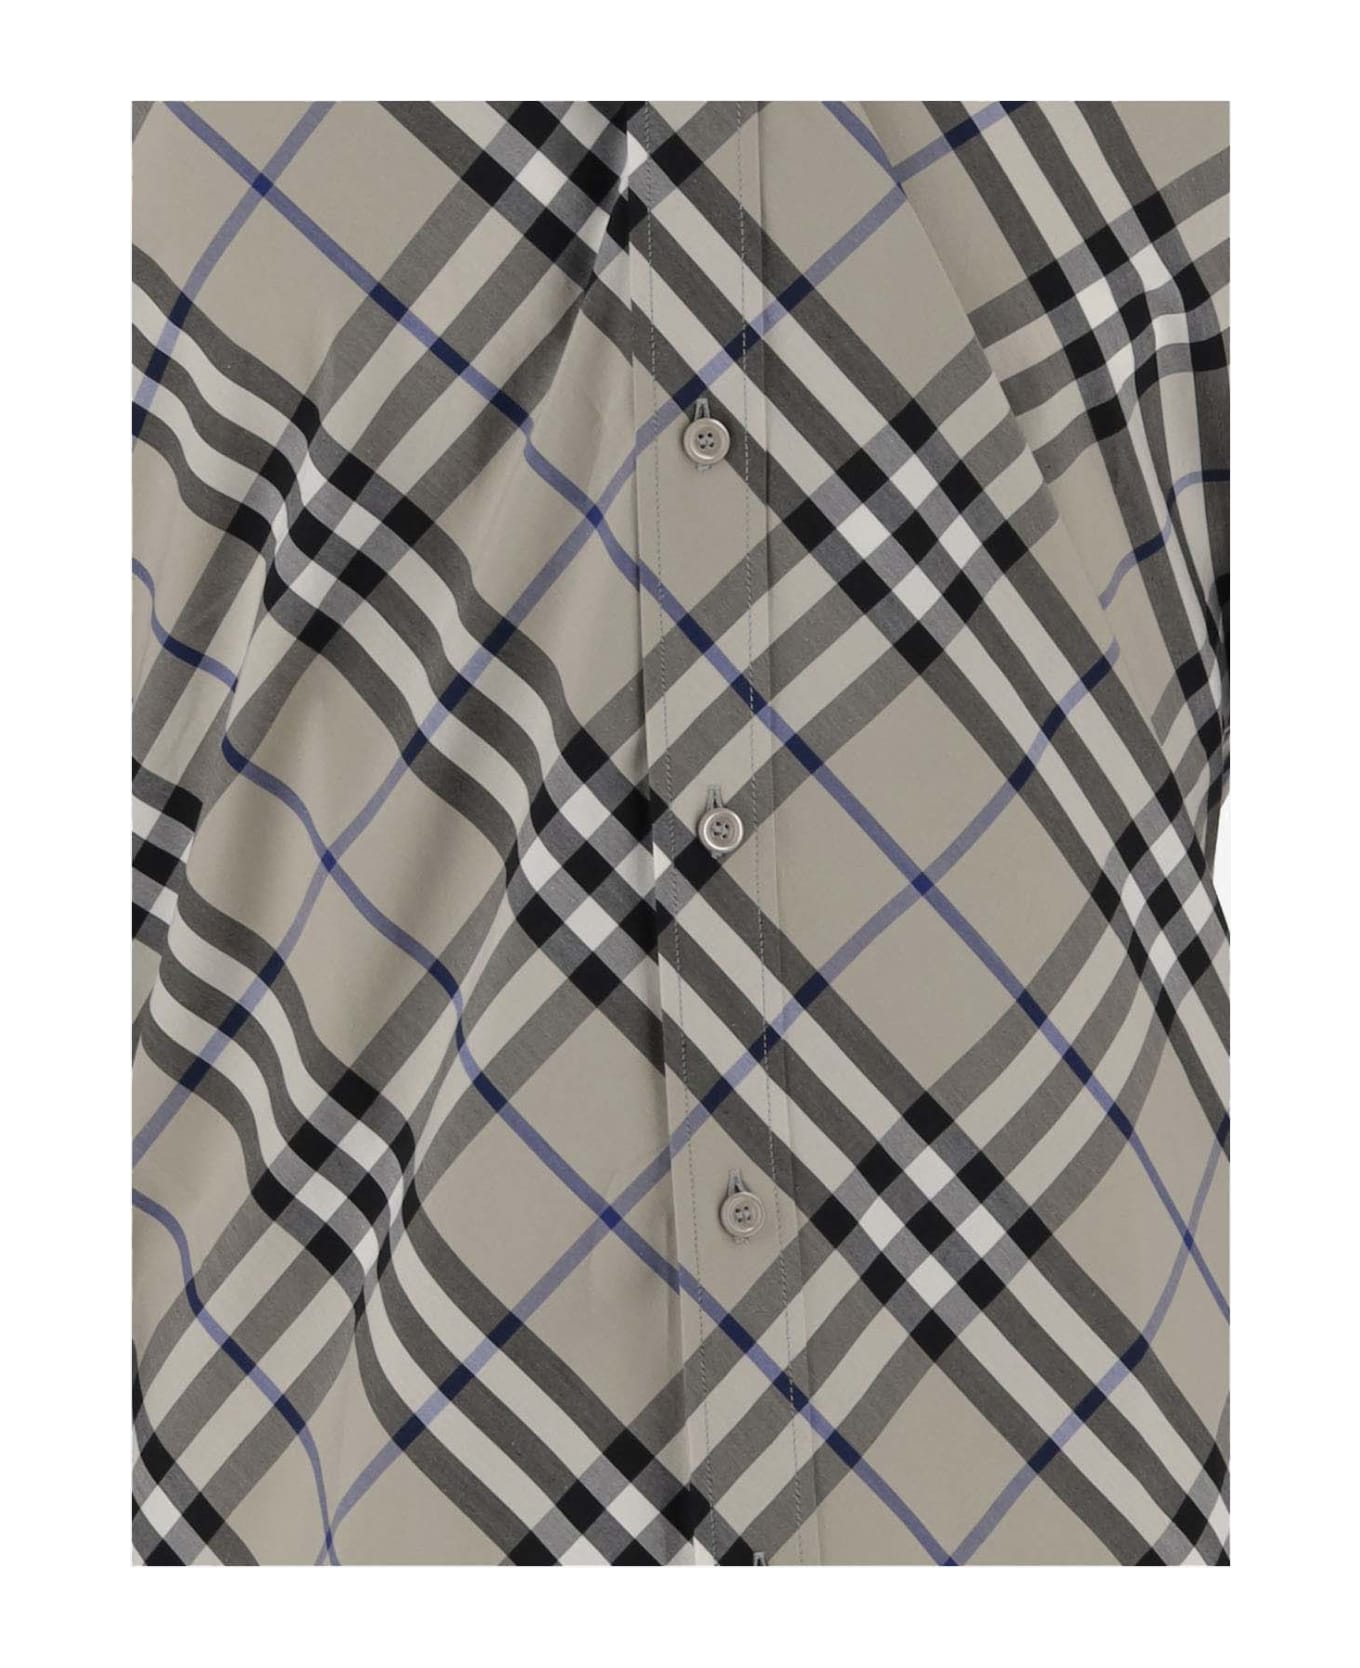 Burberry Cotton Shirt With Check Pattern - Red シャツ